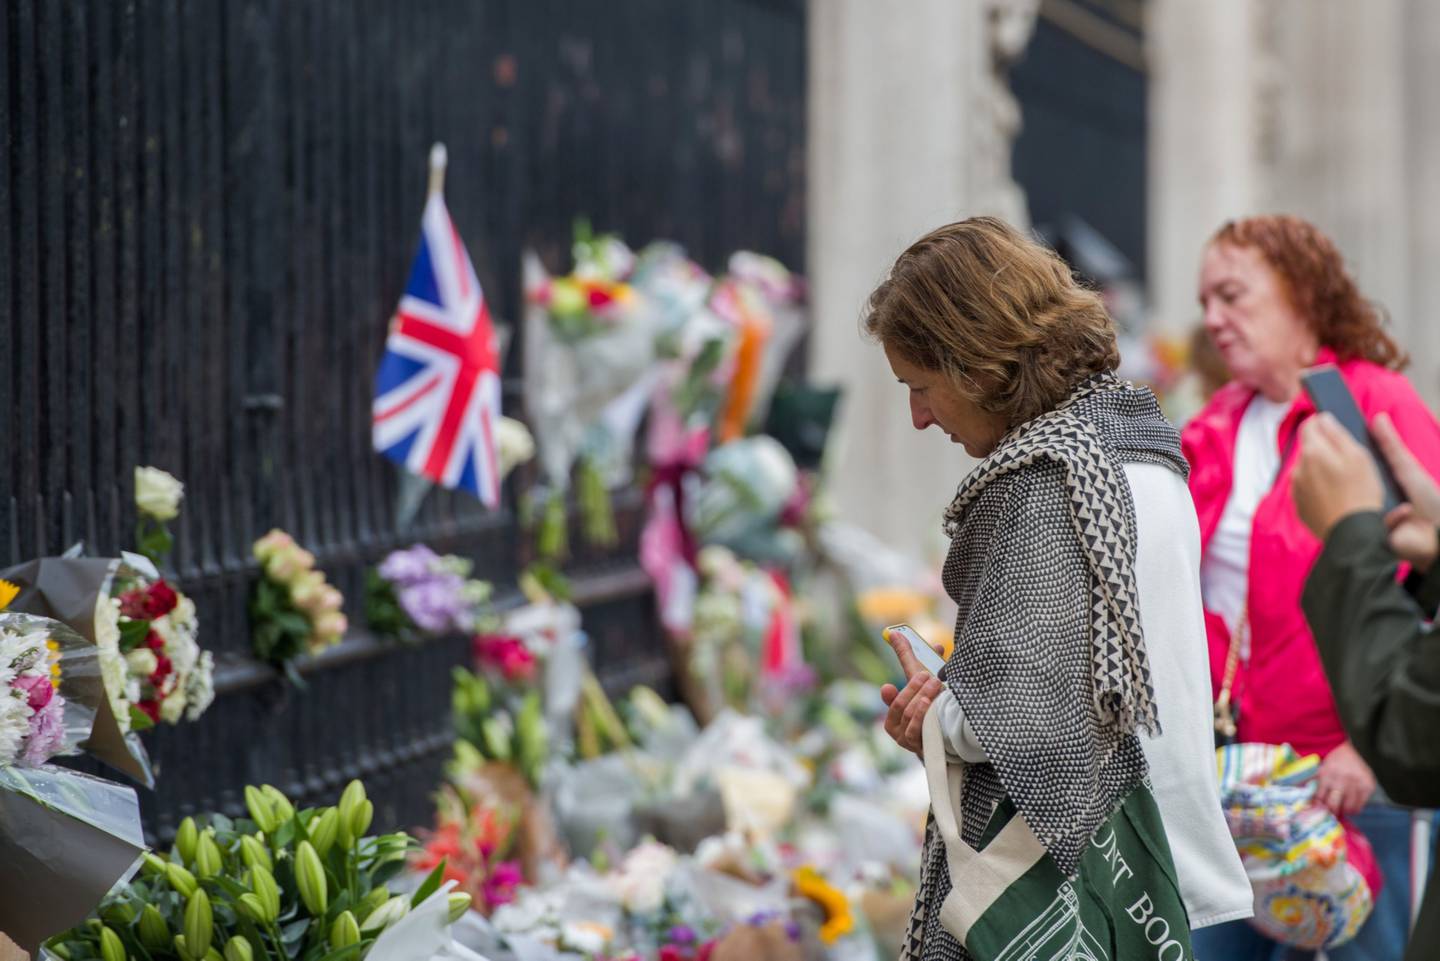 A well-wisher looks at floral tributes at the gates of Buckingham Palace on the first day of public mourning following the death of Queen Elizabeth II, in central London, UK, on Friday, Sept. 9, 2022.